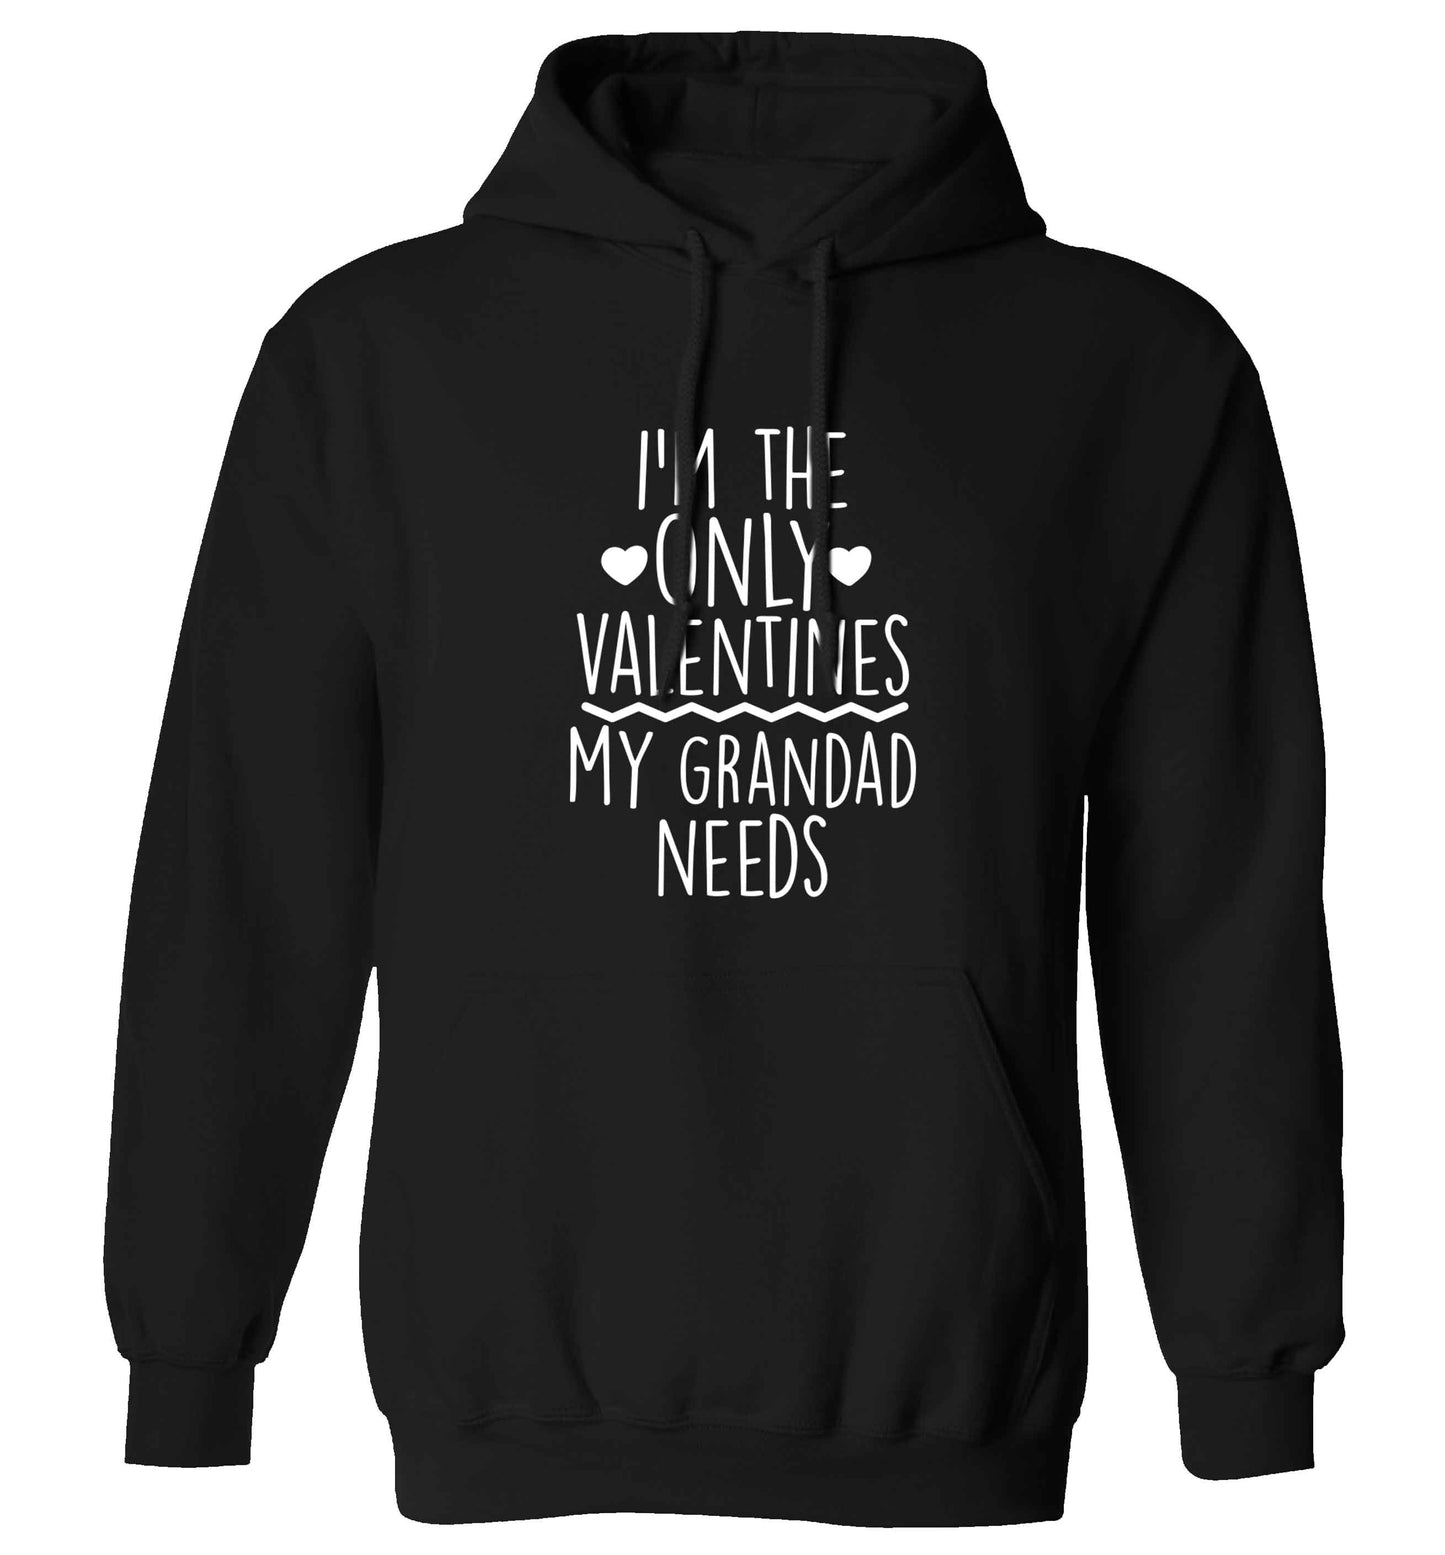 I'm the only valentines my grandad needs adults unisex black hoodie 2XL